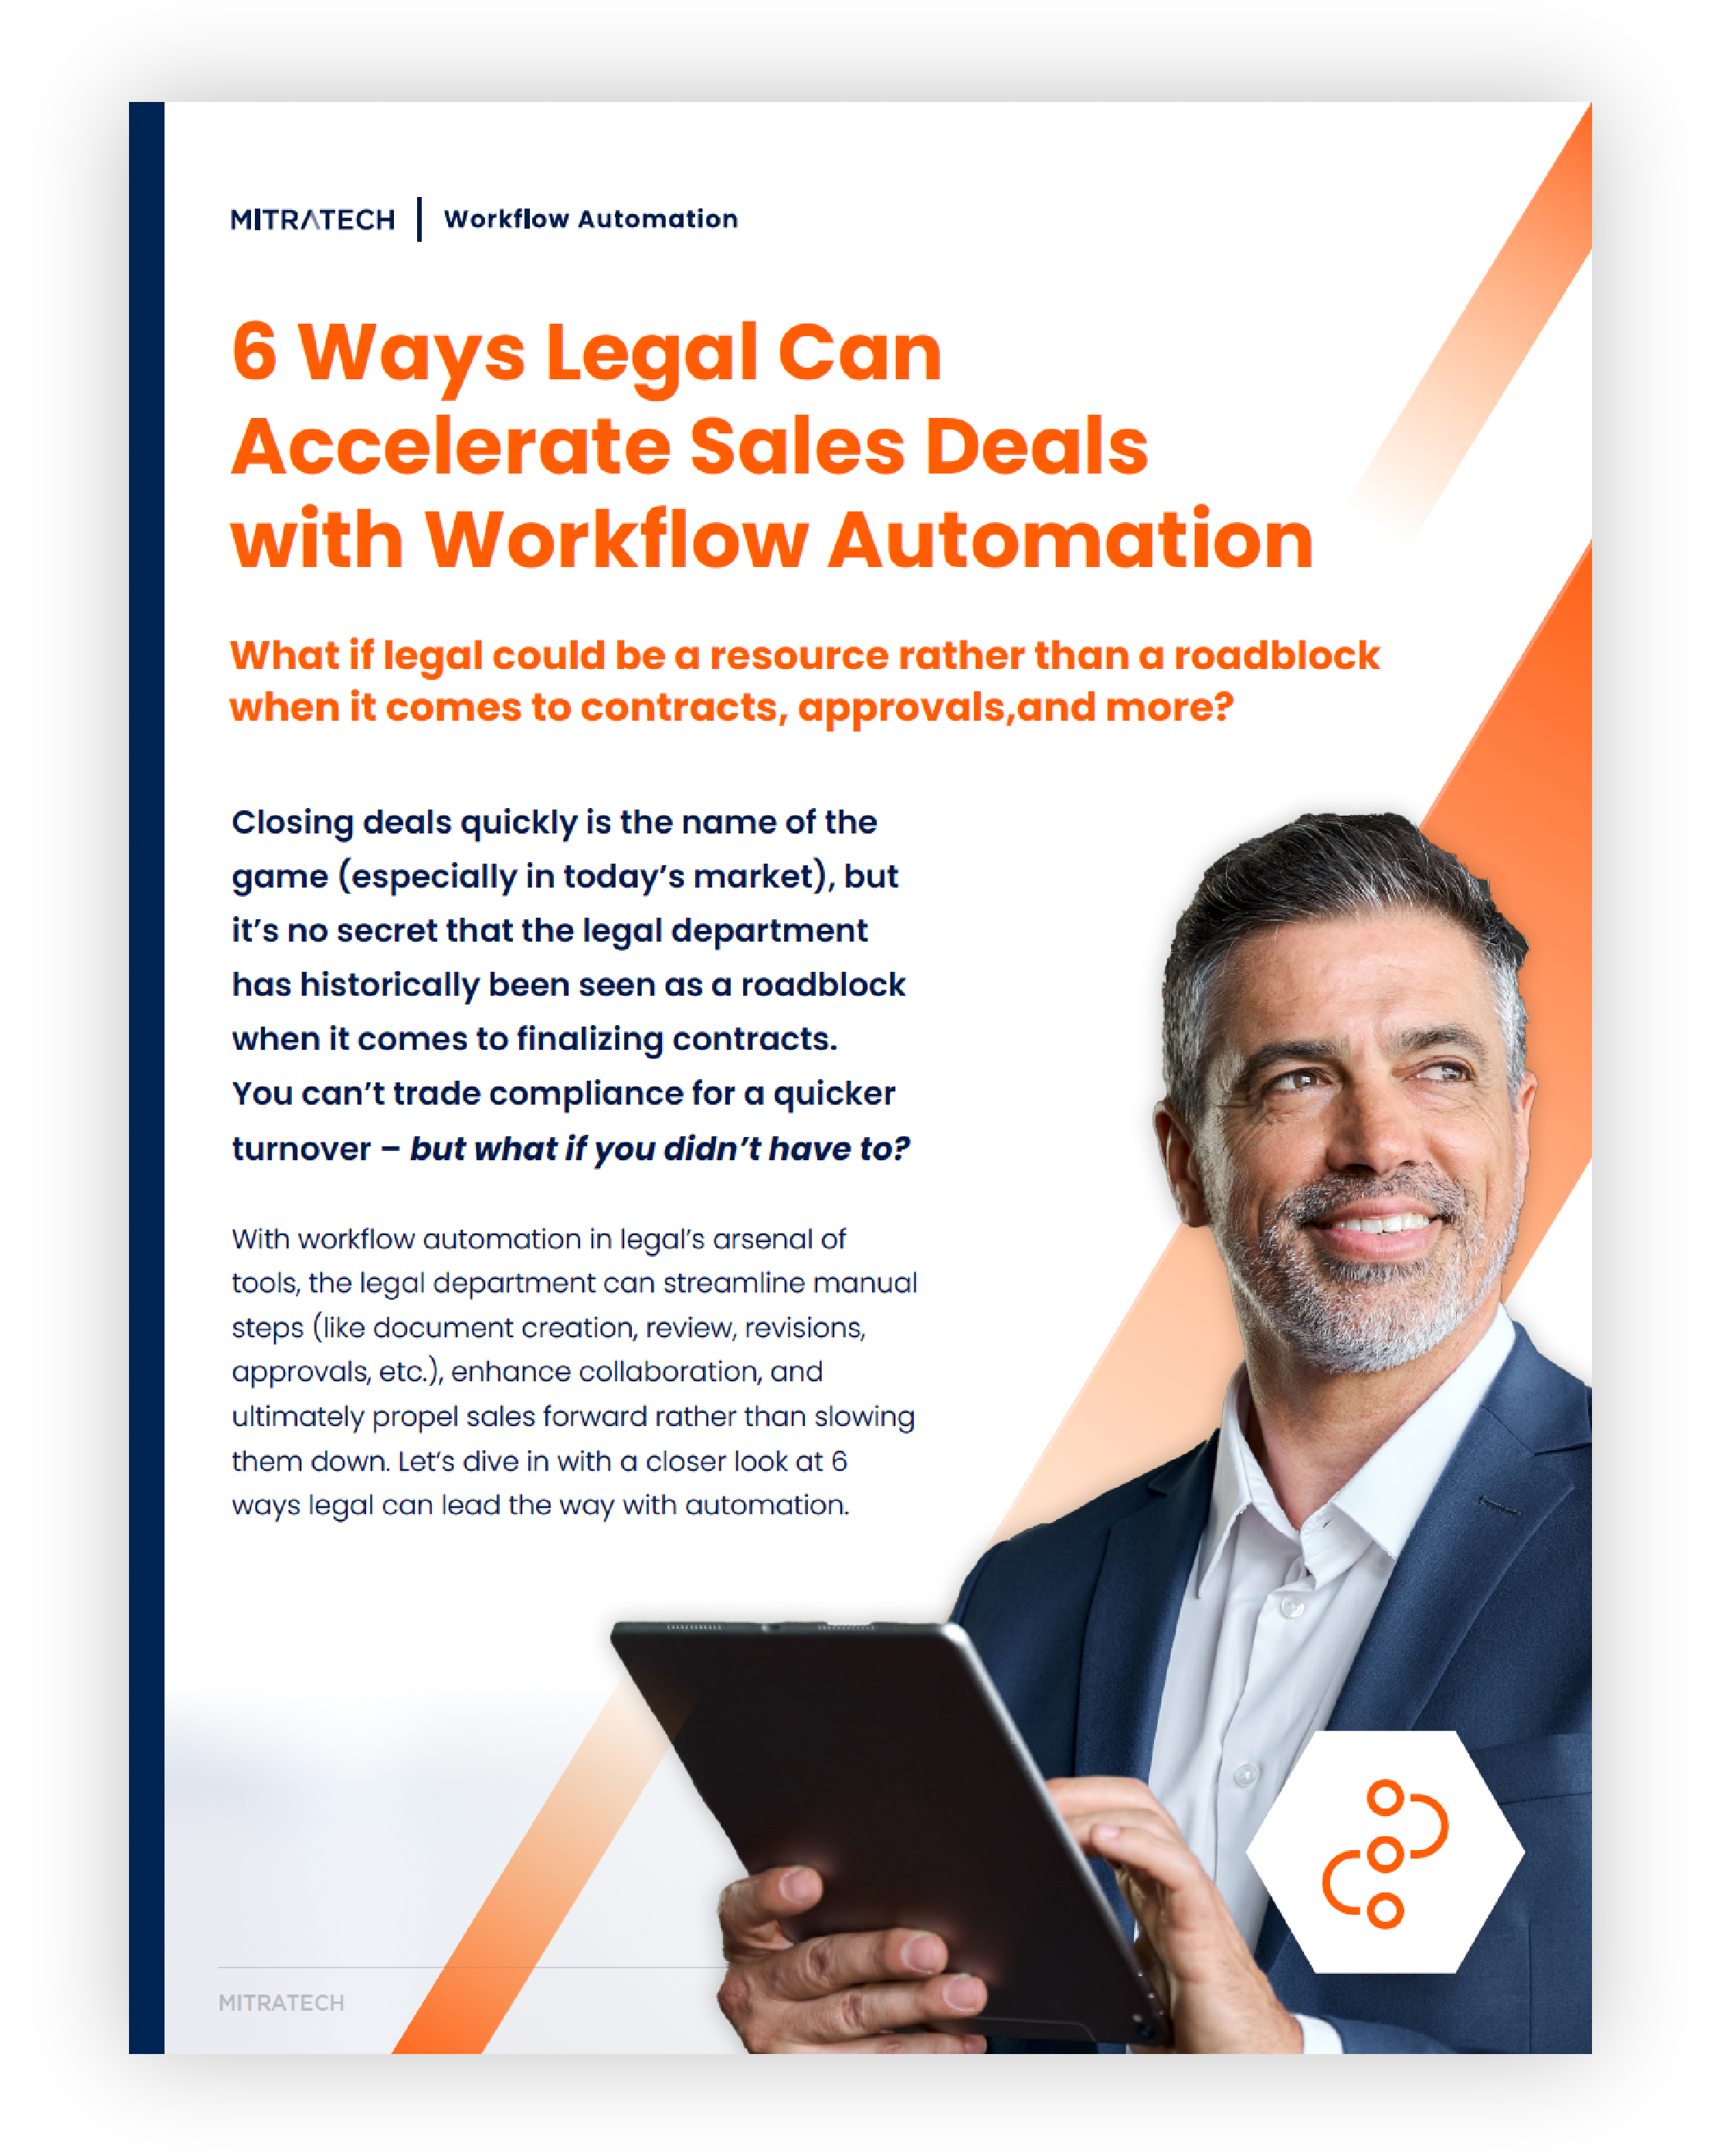 Checklist 6 Ways Legal Can Accelerate Sales Deals with Workflow Automation